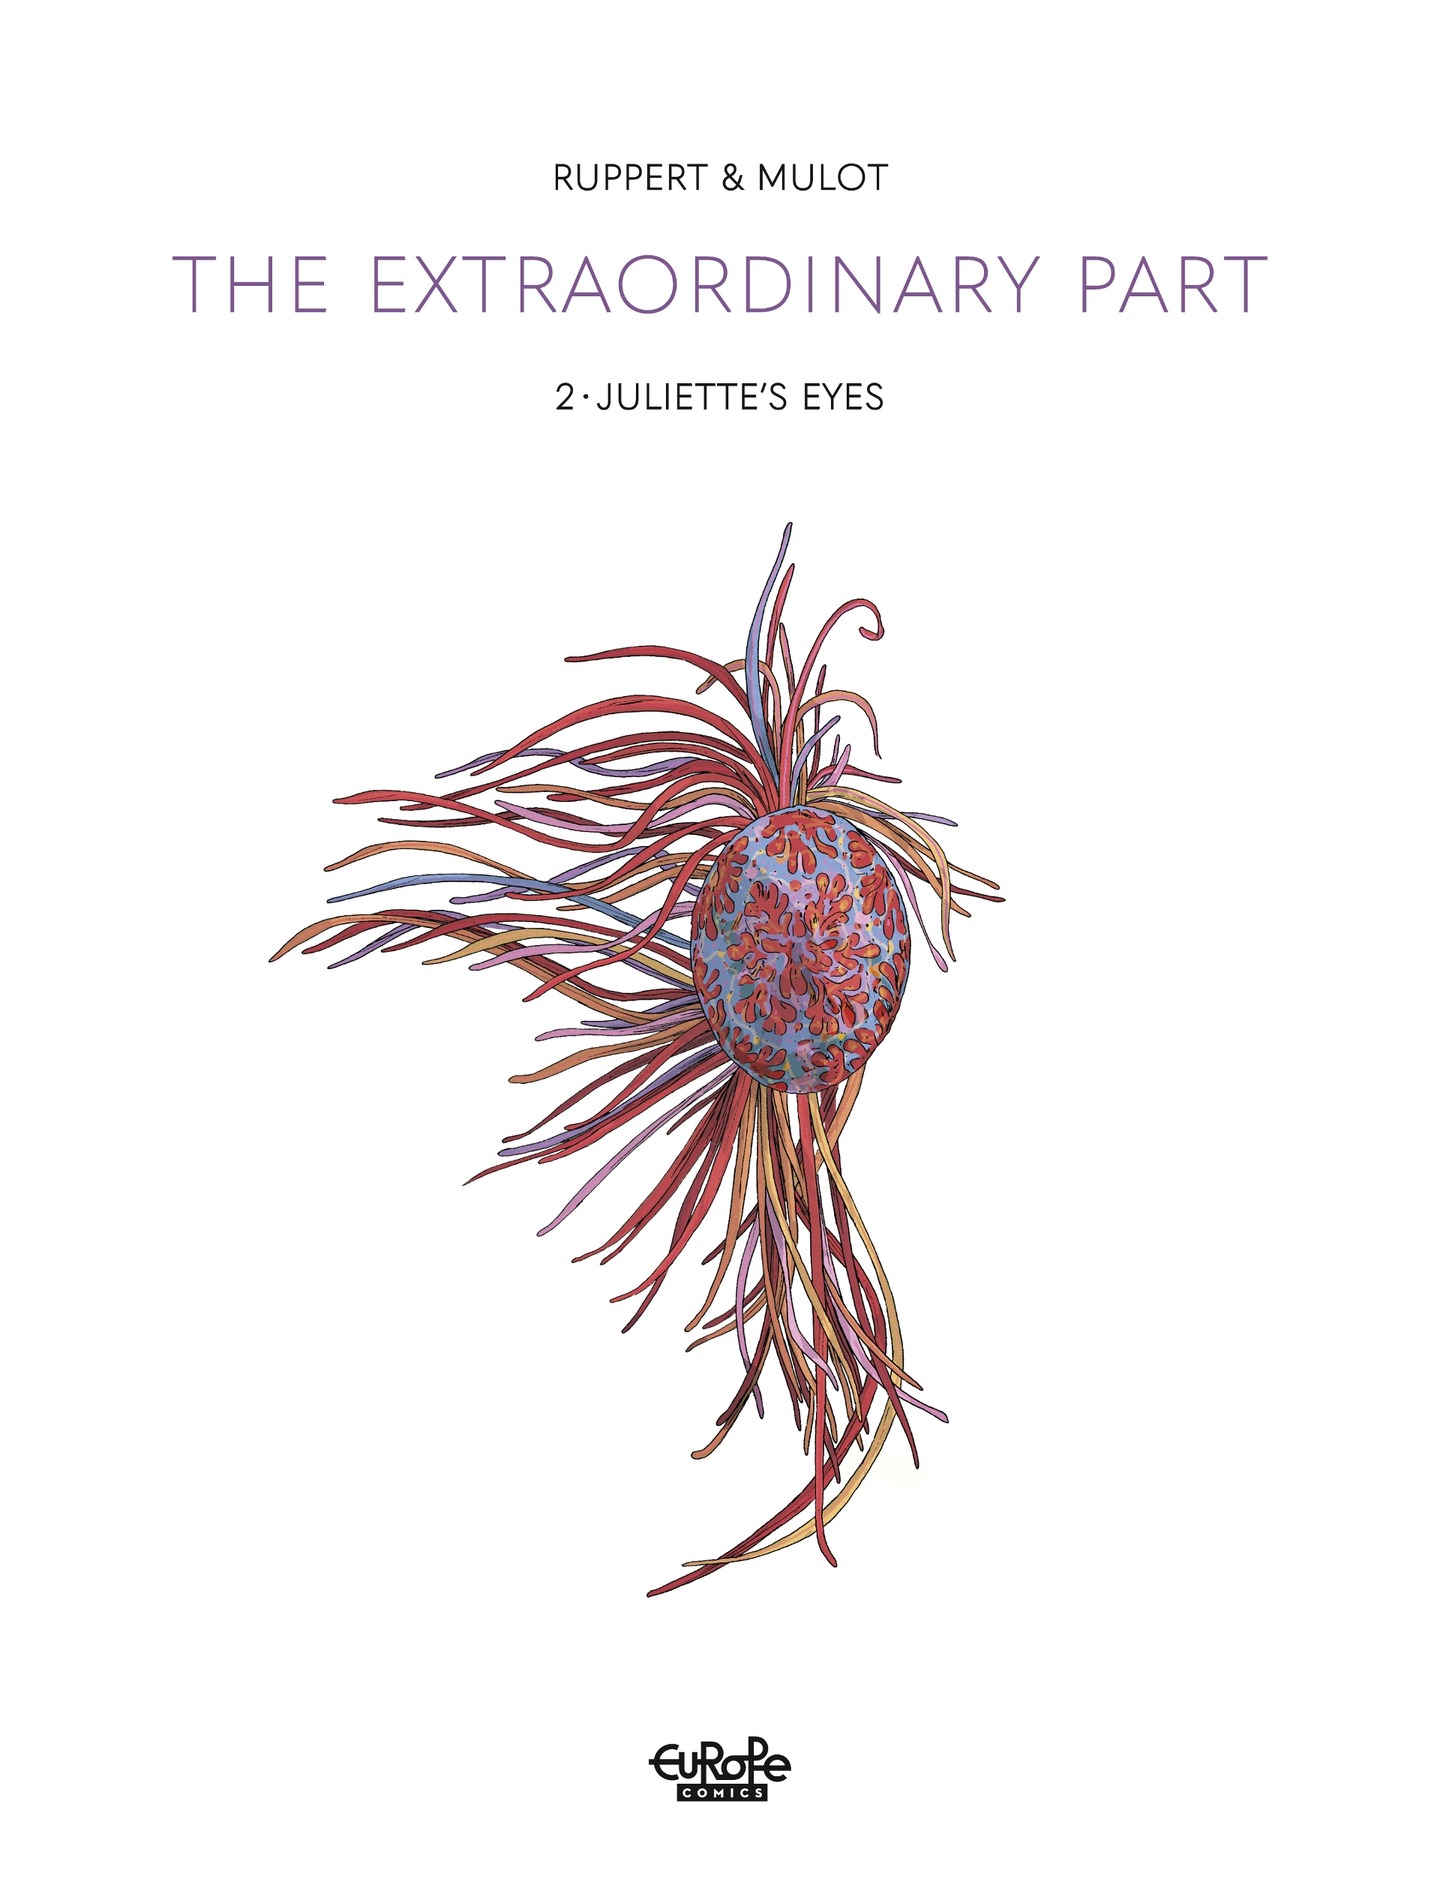 Read online The Extraordinary Part comic -  Issue # TPB 2 - 2